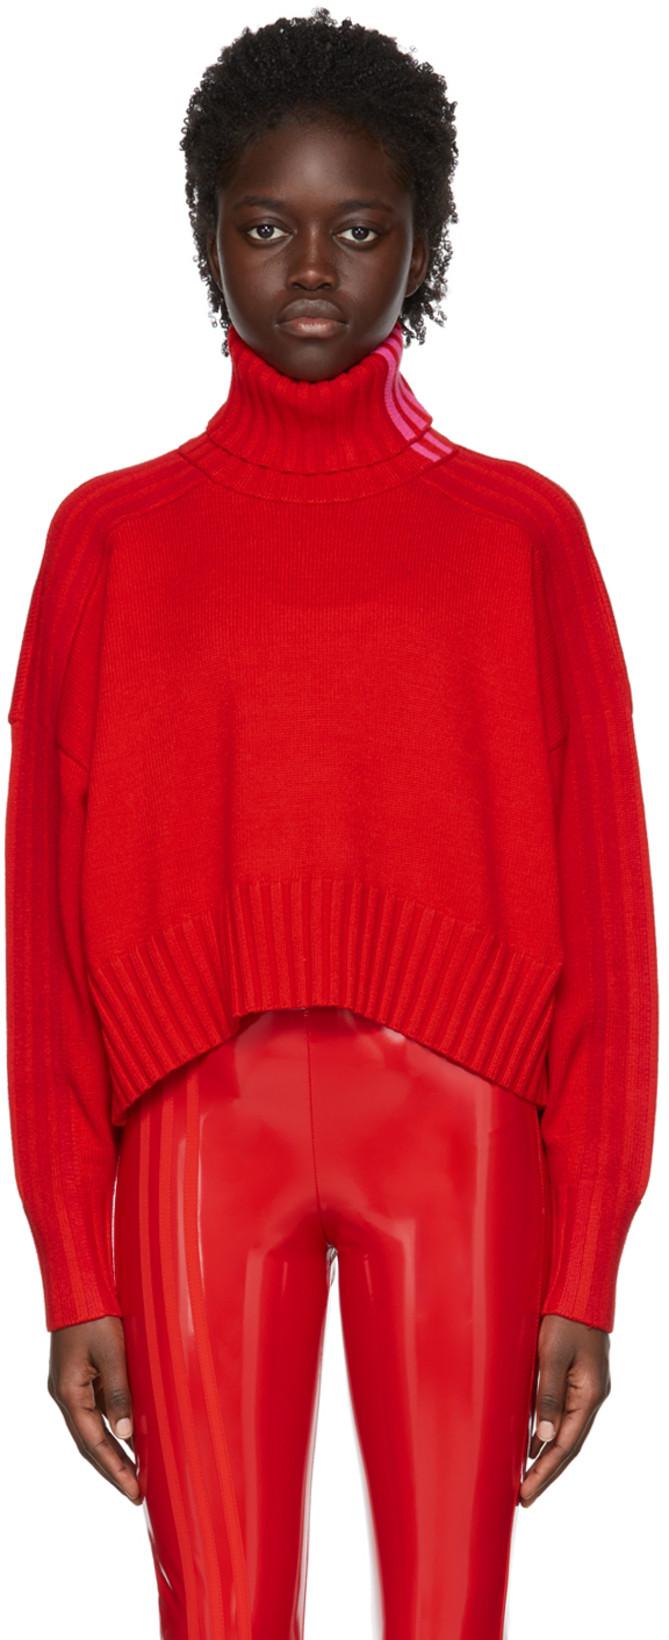 Red Rayon Turtleneck by ADIDAS X IVY PARK